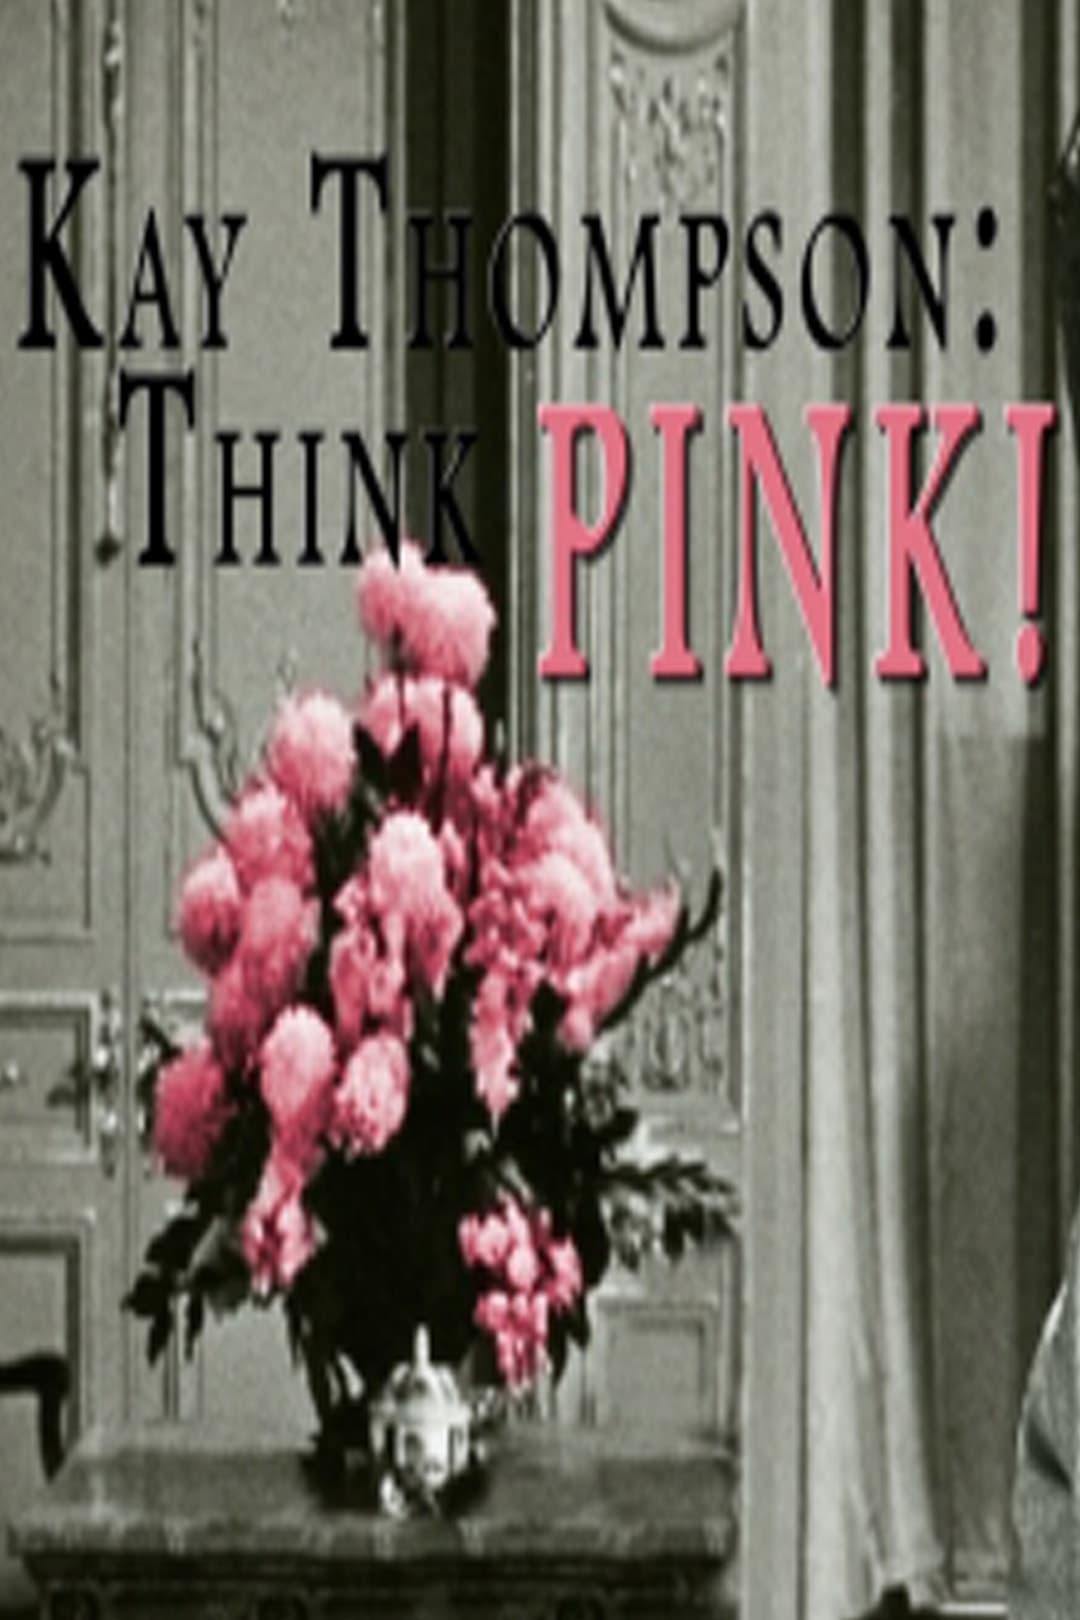 Kay Thompson: Think Pink! poster